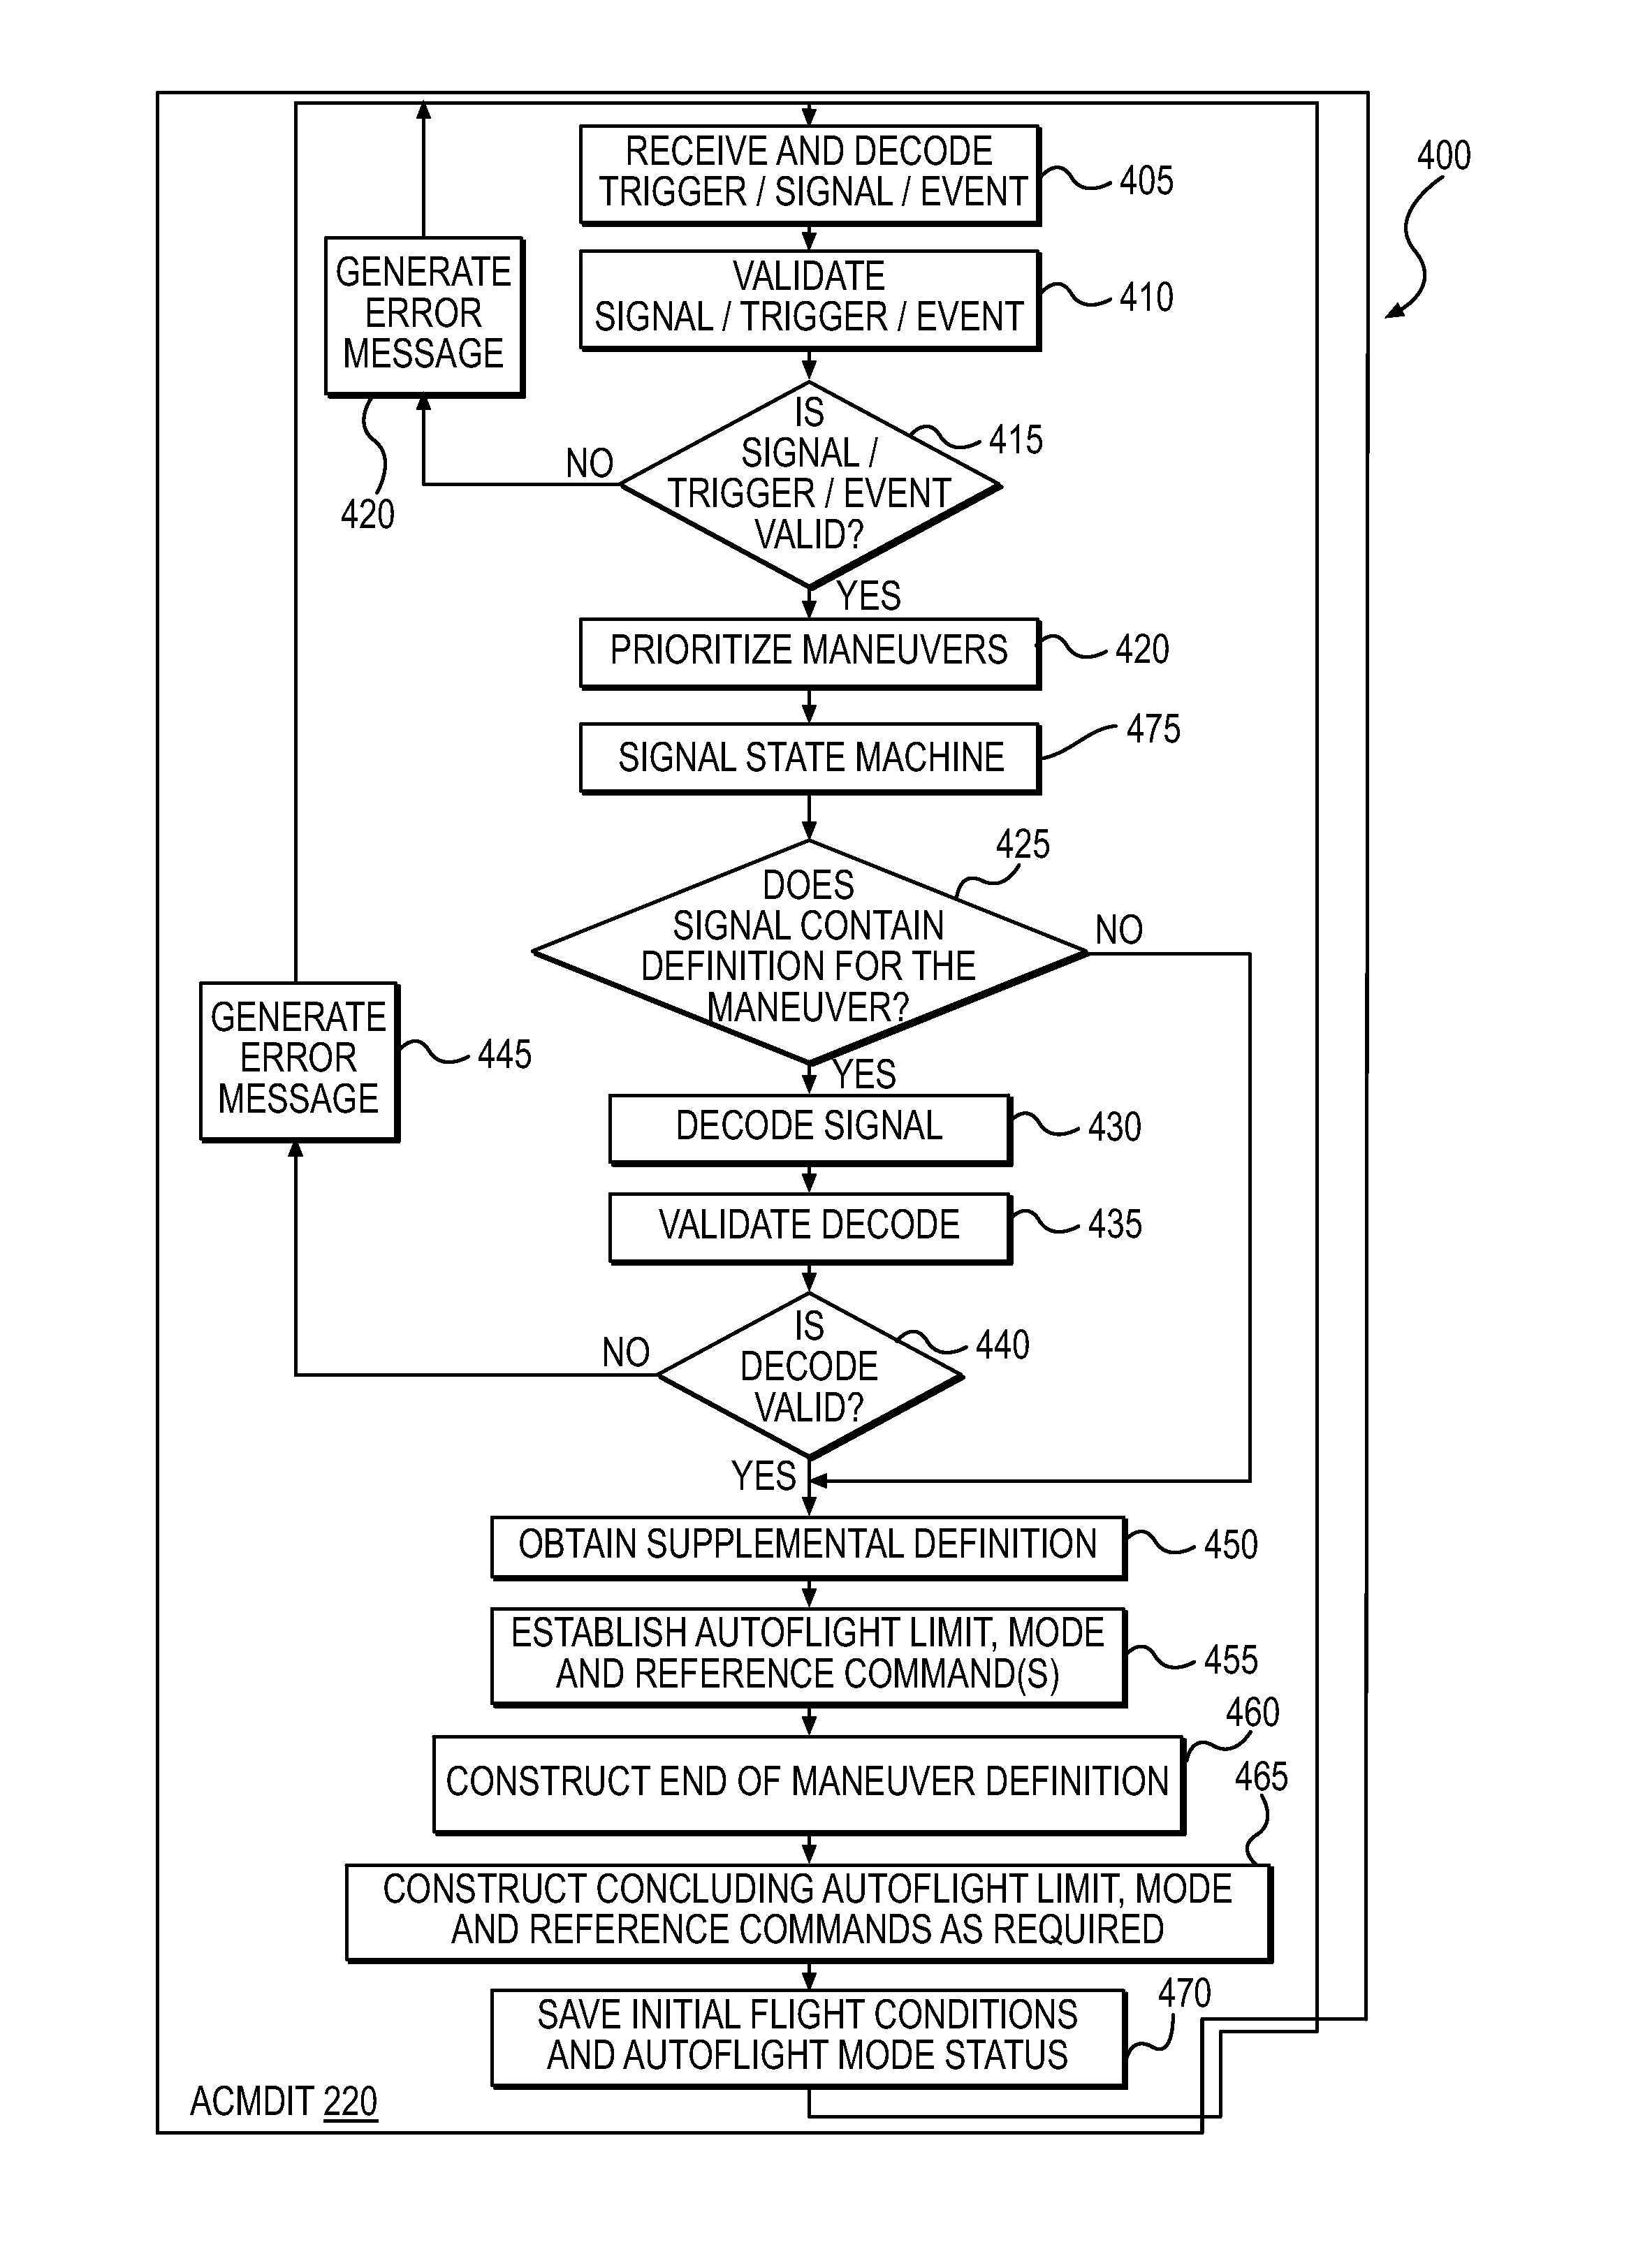 Methods and systems for translating an emergency system alert signal to an automated flight system maneuver